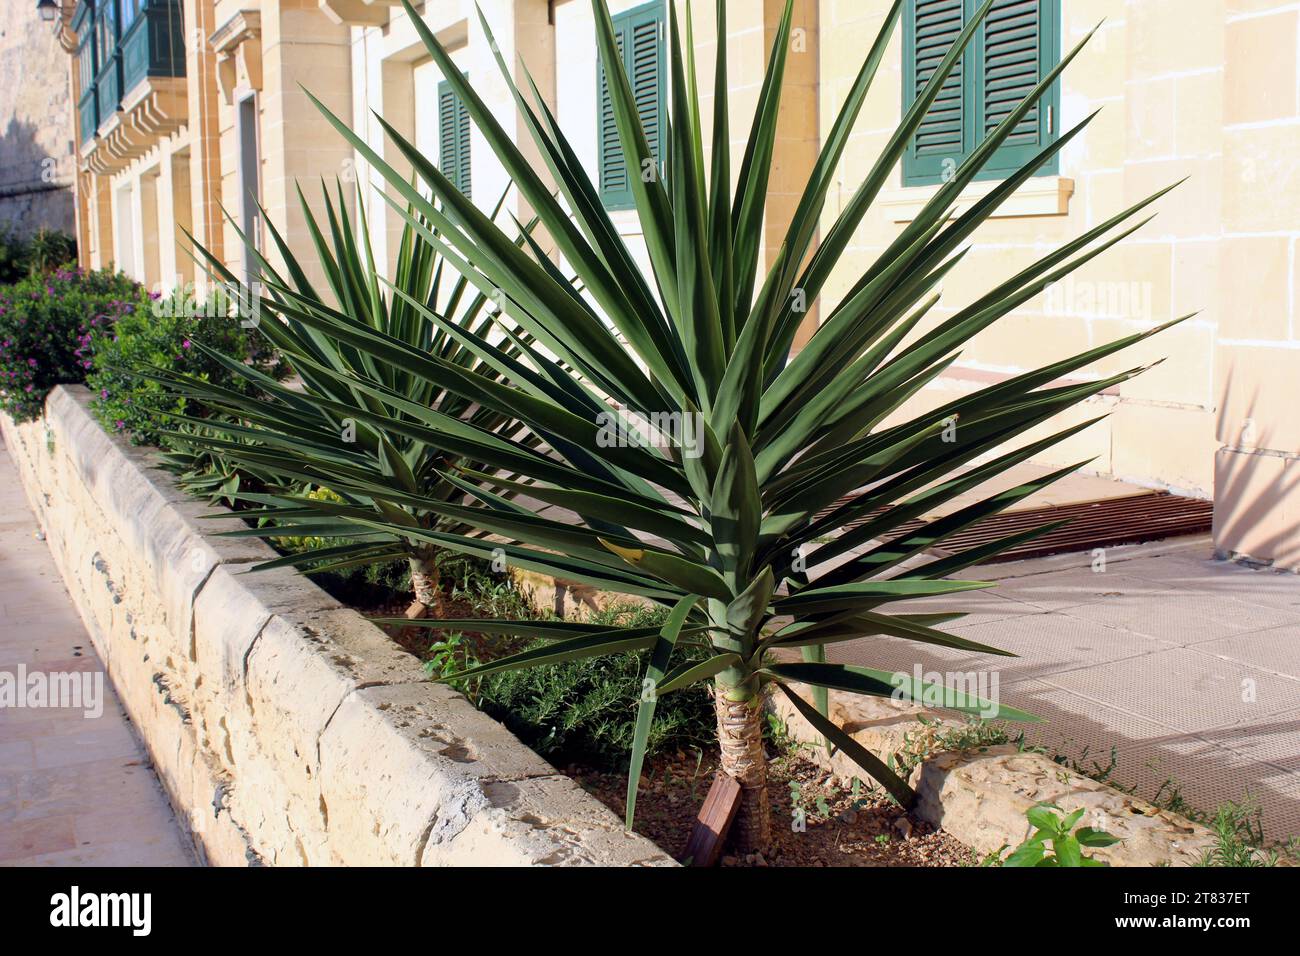 Yucca gigantea a shrub with multiple shoots Stock Photo